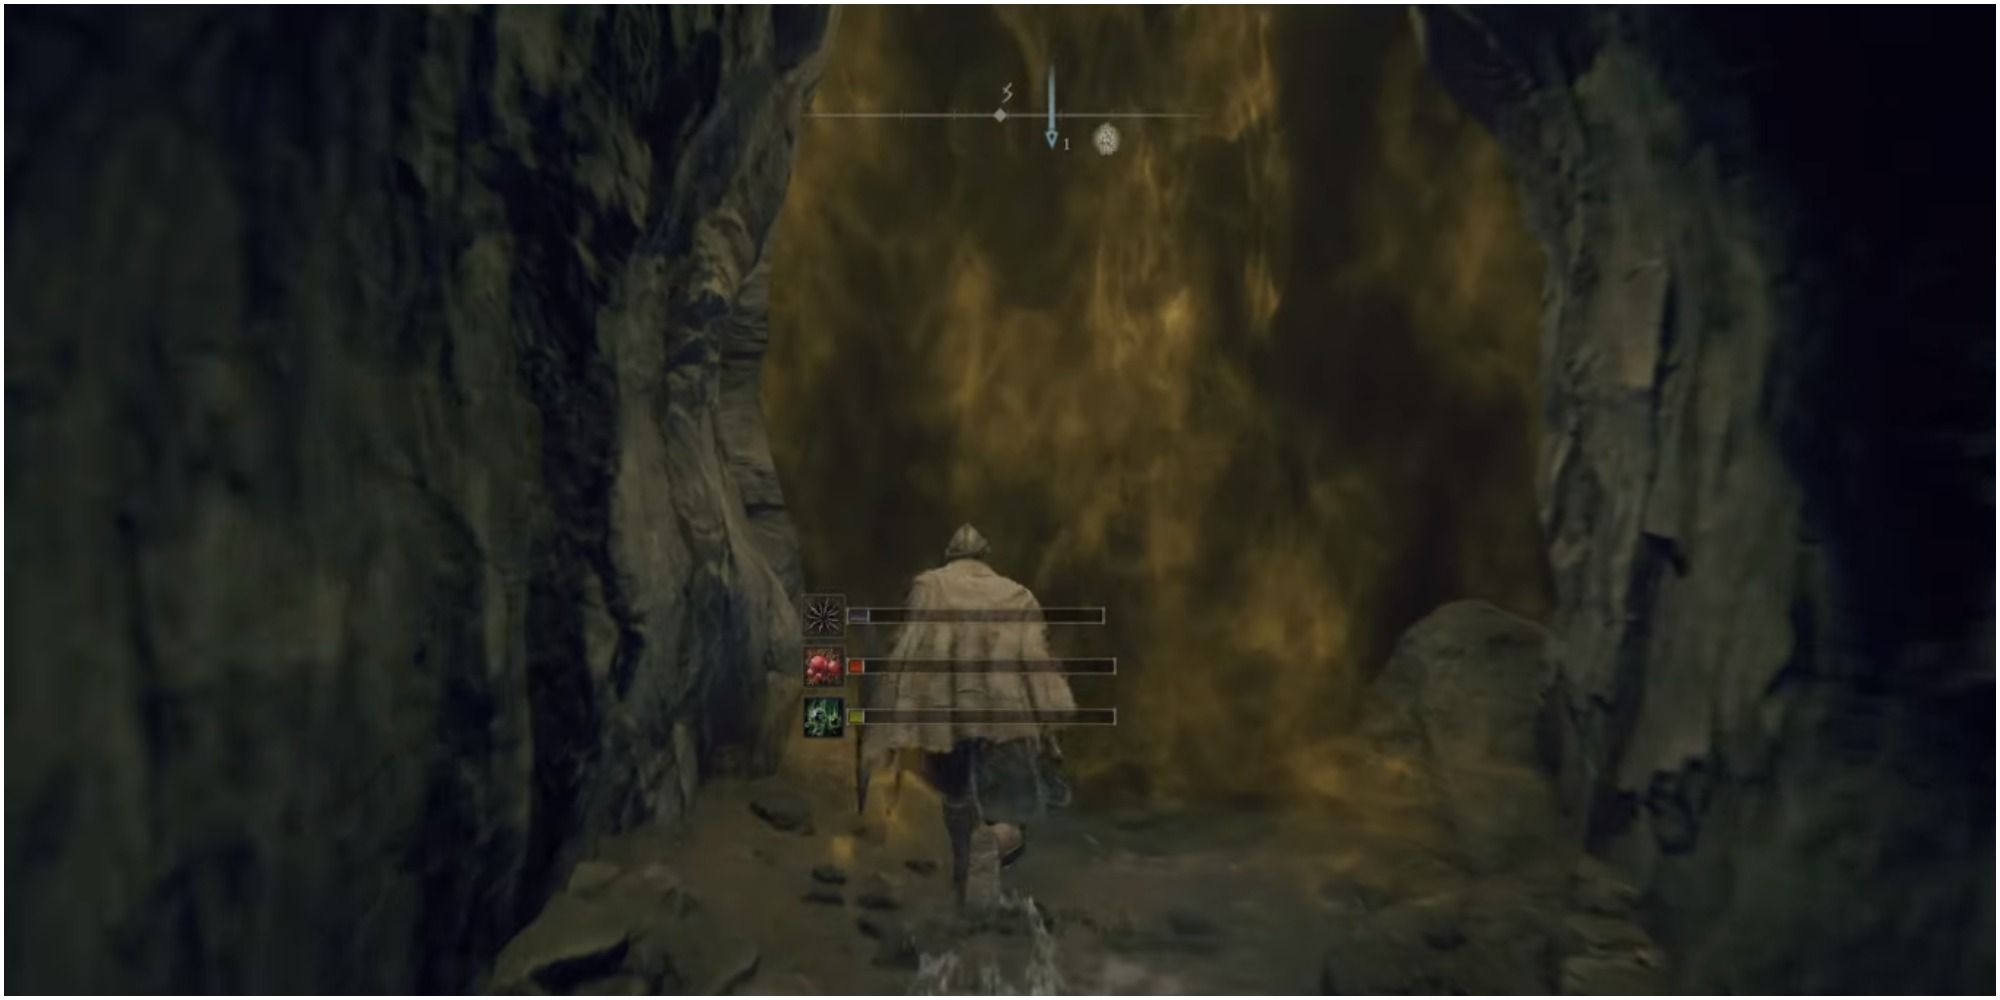 The player approaching the boss gate.